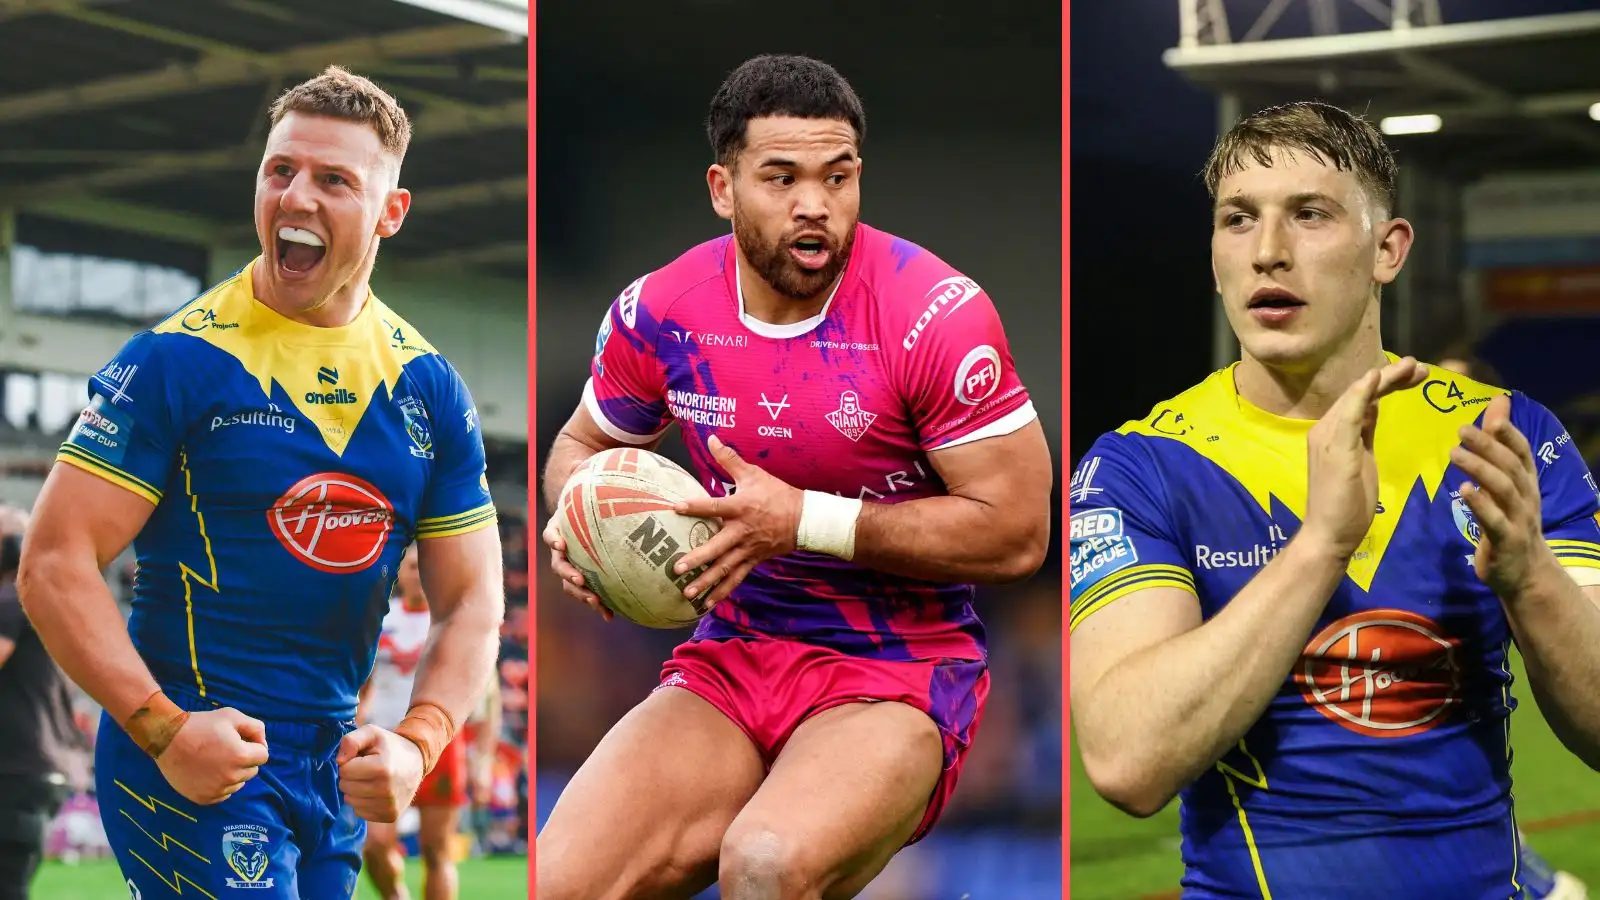 A superb combined XIII of Huddersfield Giants and Warrington Wolves stars